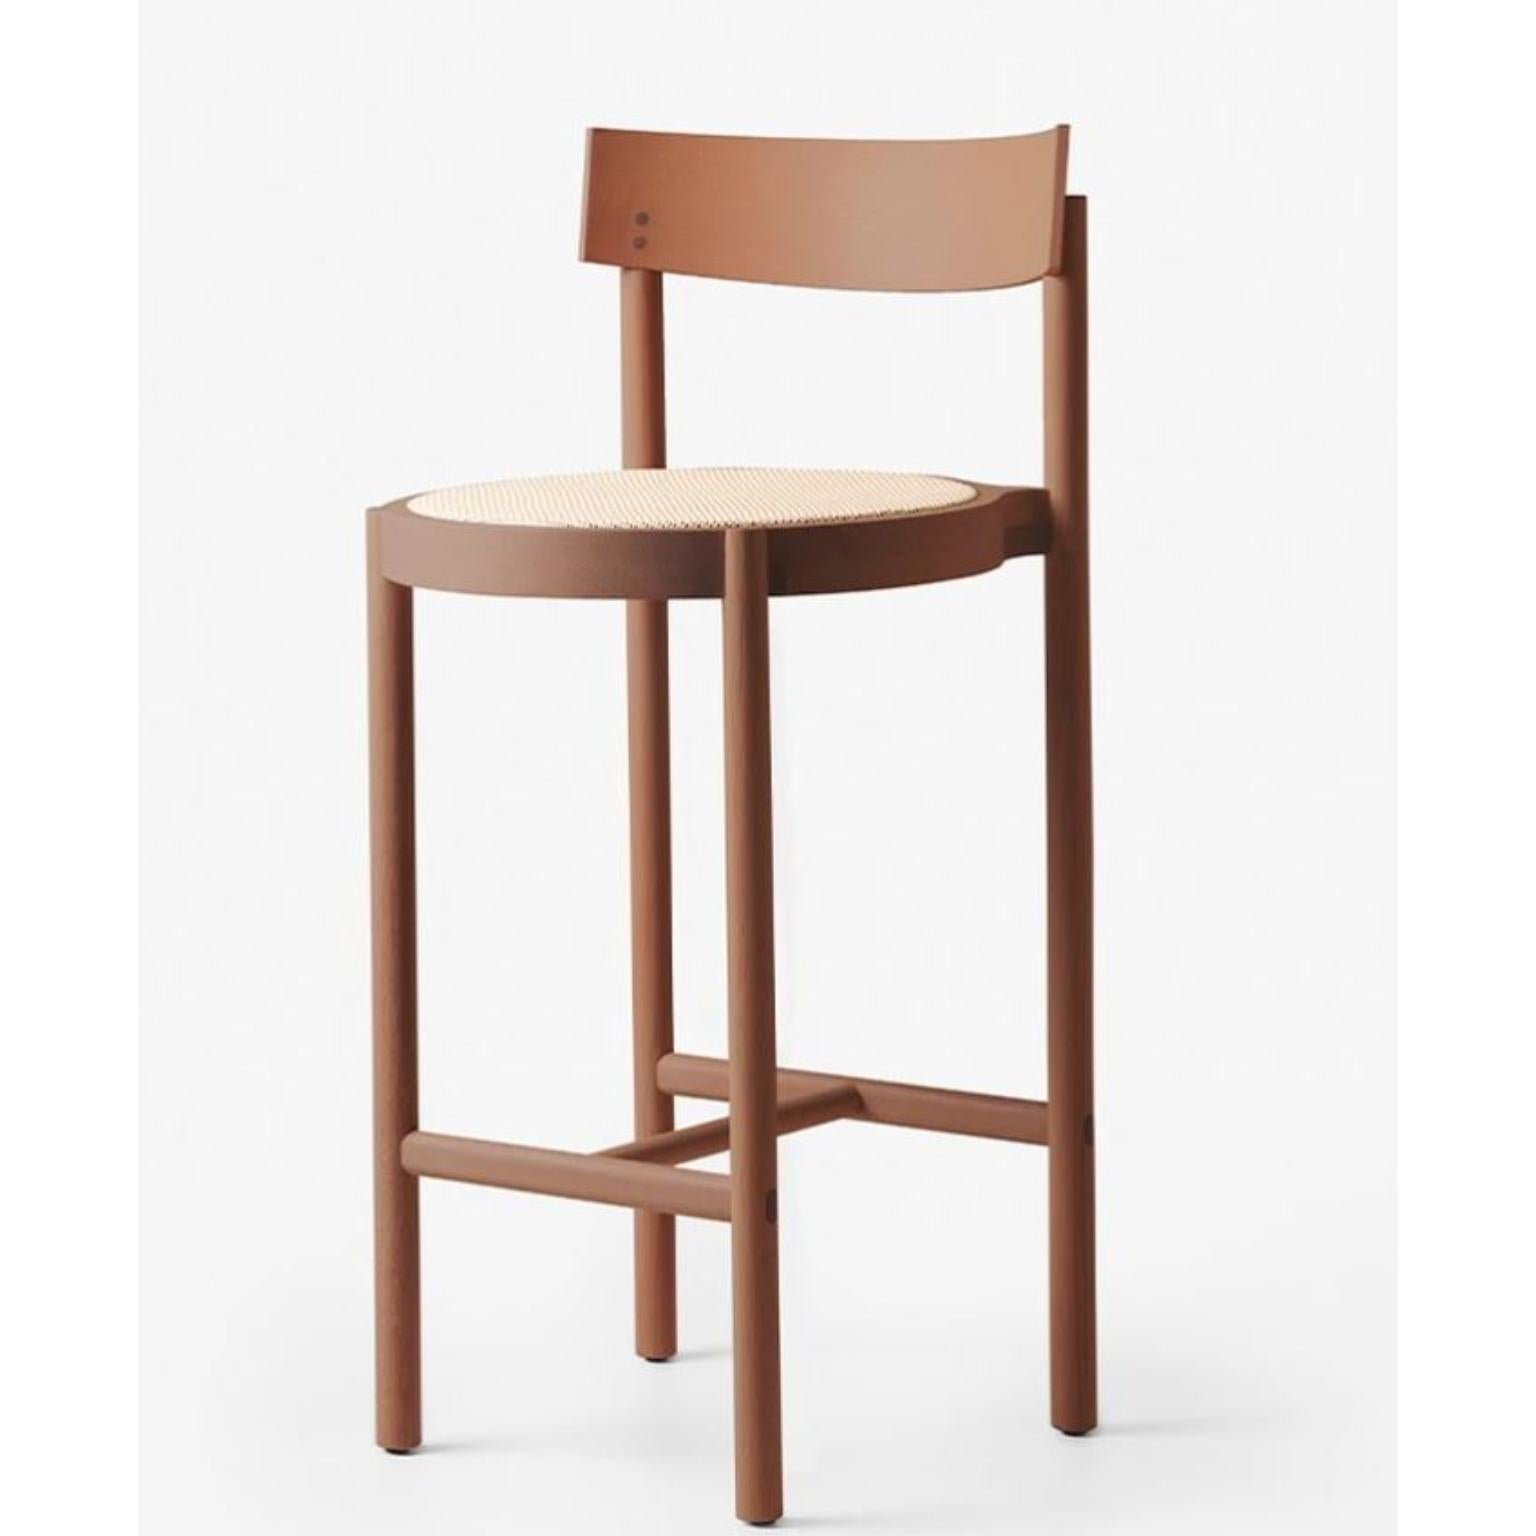 Brown Gravatá Bar Stool by Wentz
Dimensions: D 52 x W 47 x H 100 cm
Materials: Tauari Wood, Cane/Upholstery.
Weight: 4,4kg / 9,7 lbs

The Gravatá series synthesizes our vision regarding the functional and visual simplicity of furniture. Through soft